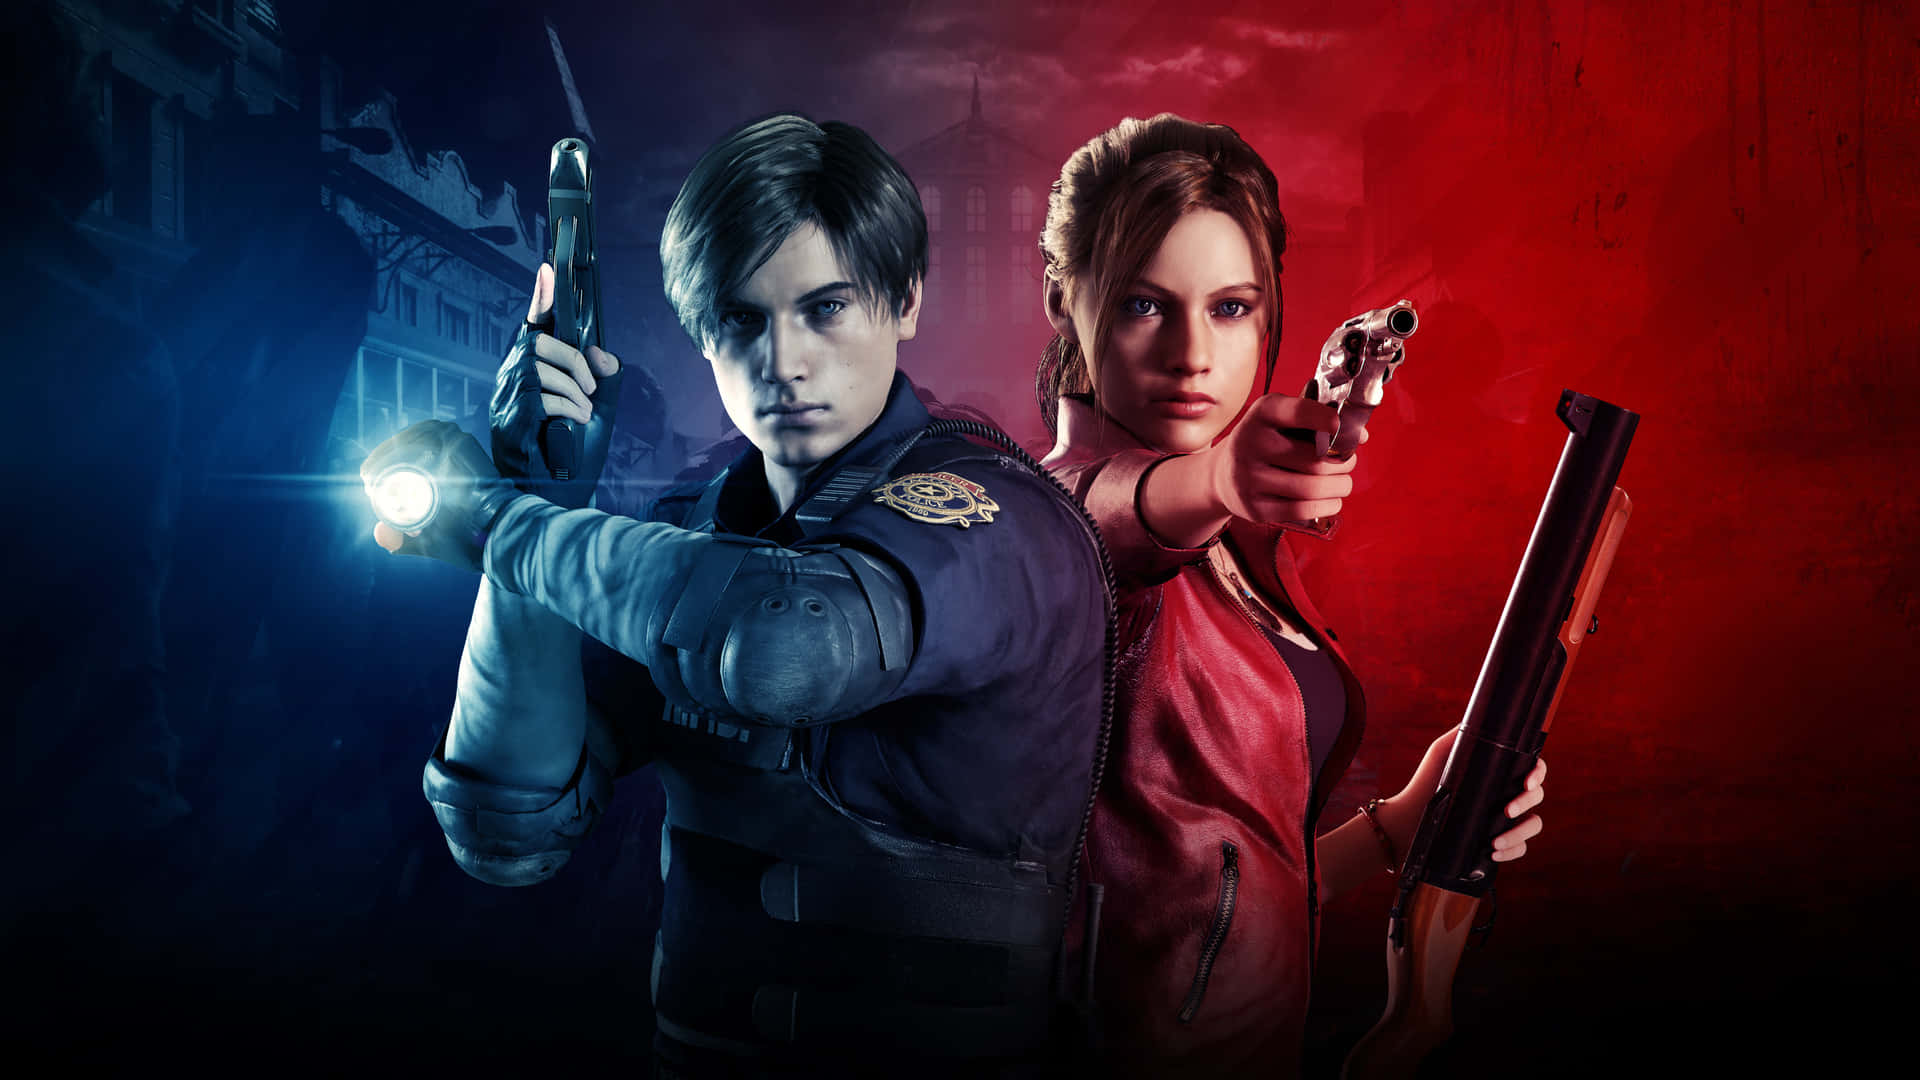 Prepare for the Unexpected - Claire Redfield from Resident Evil 2 Wallpaper